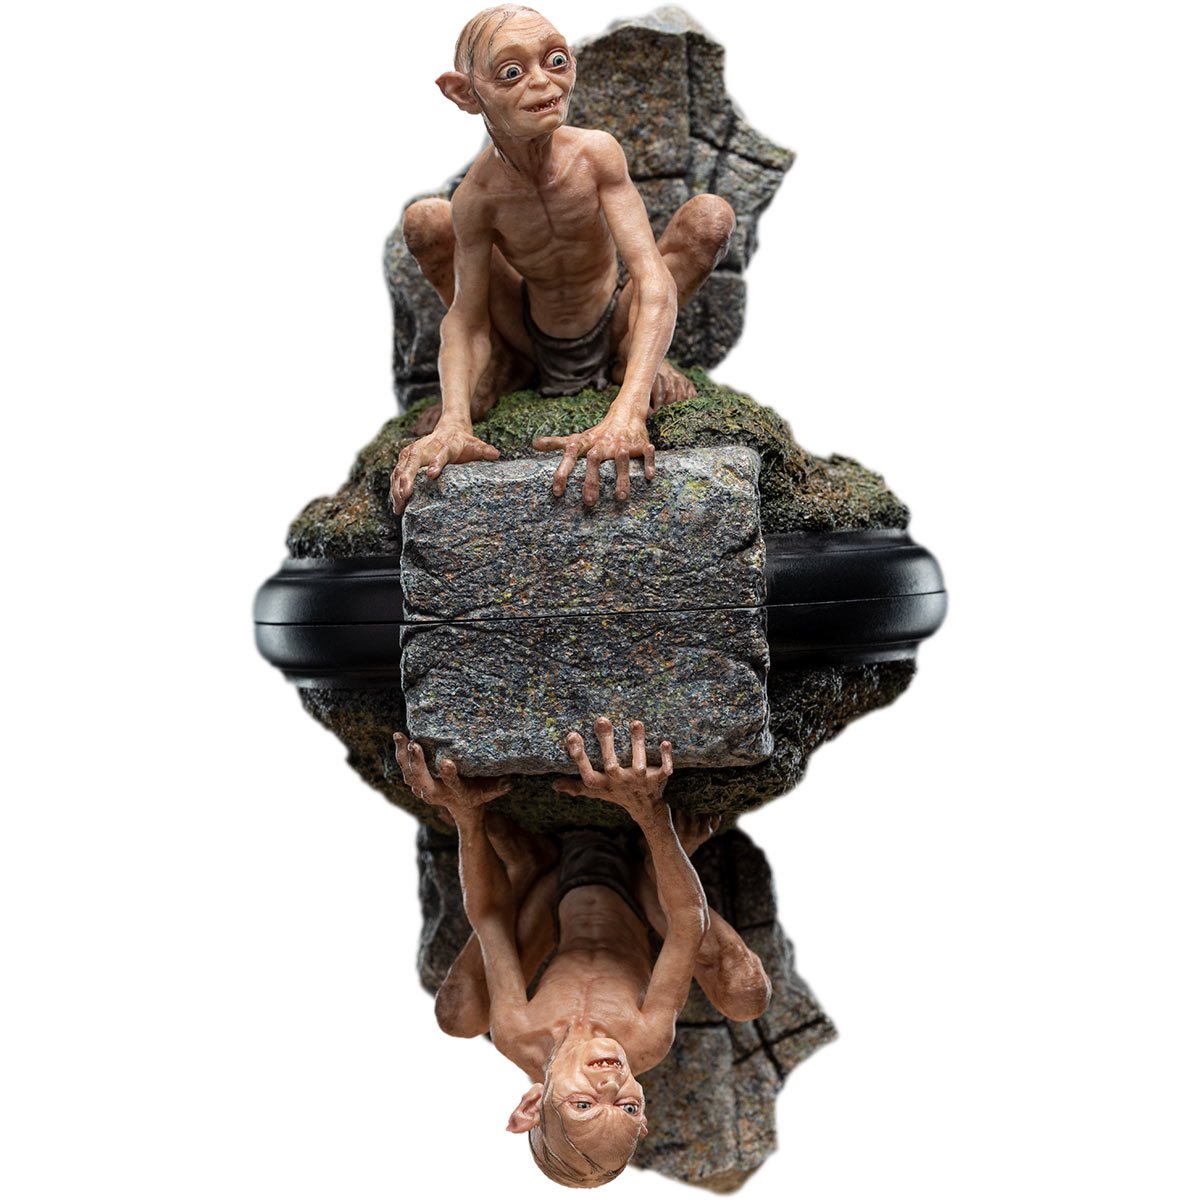 Gollum - Lord of the Rings trilogy